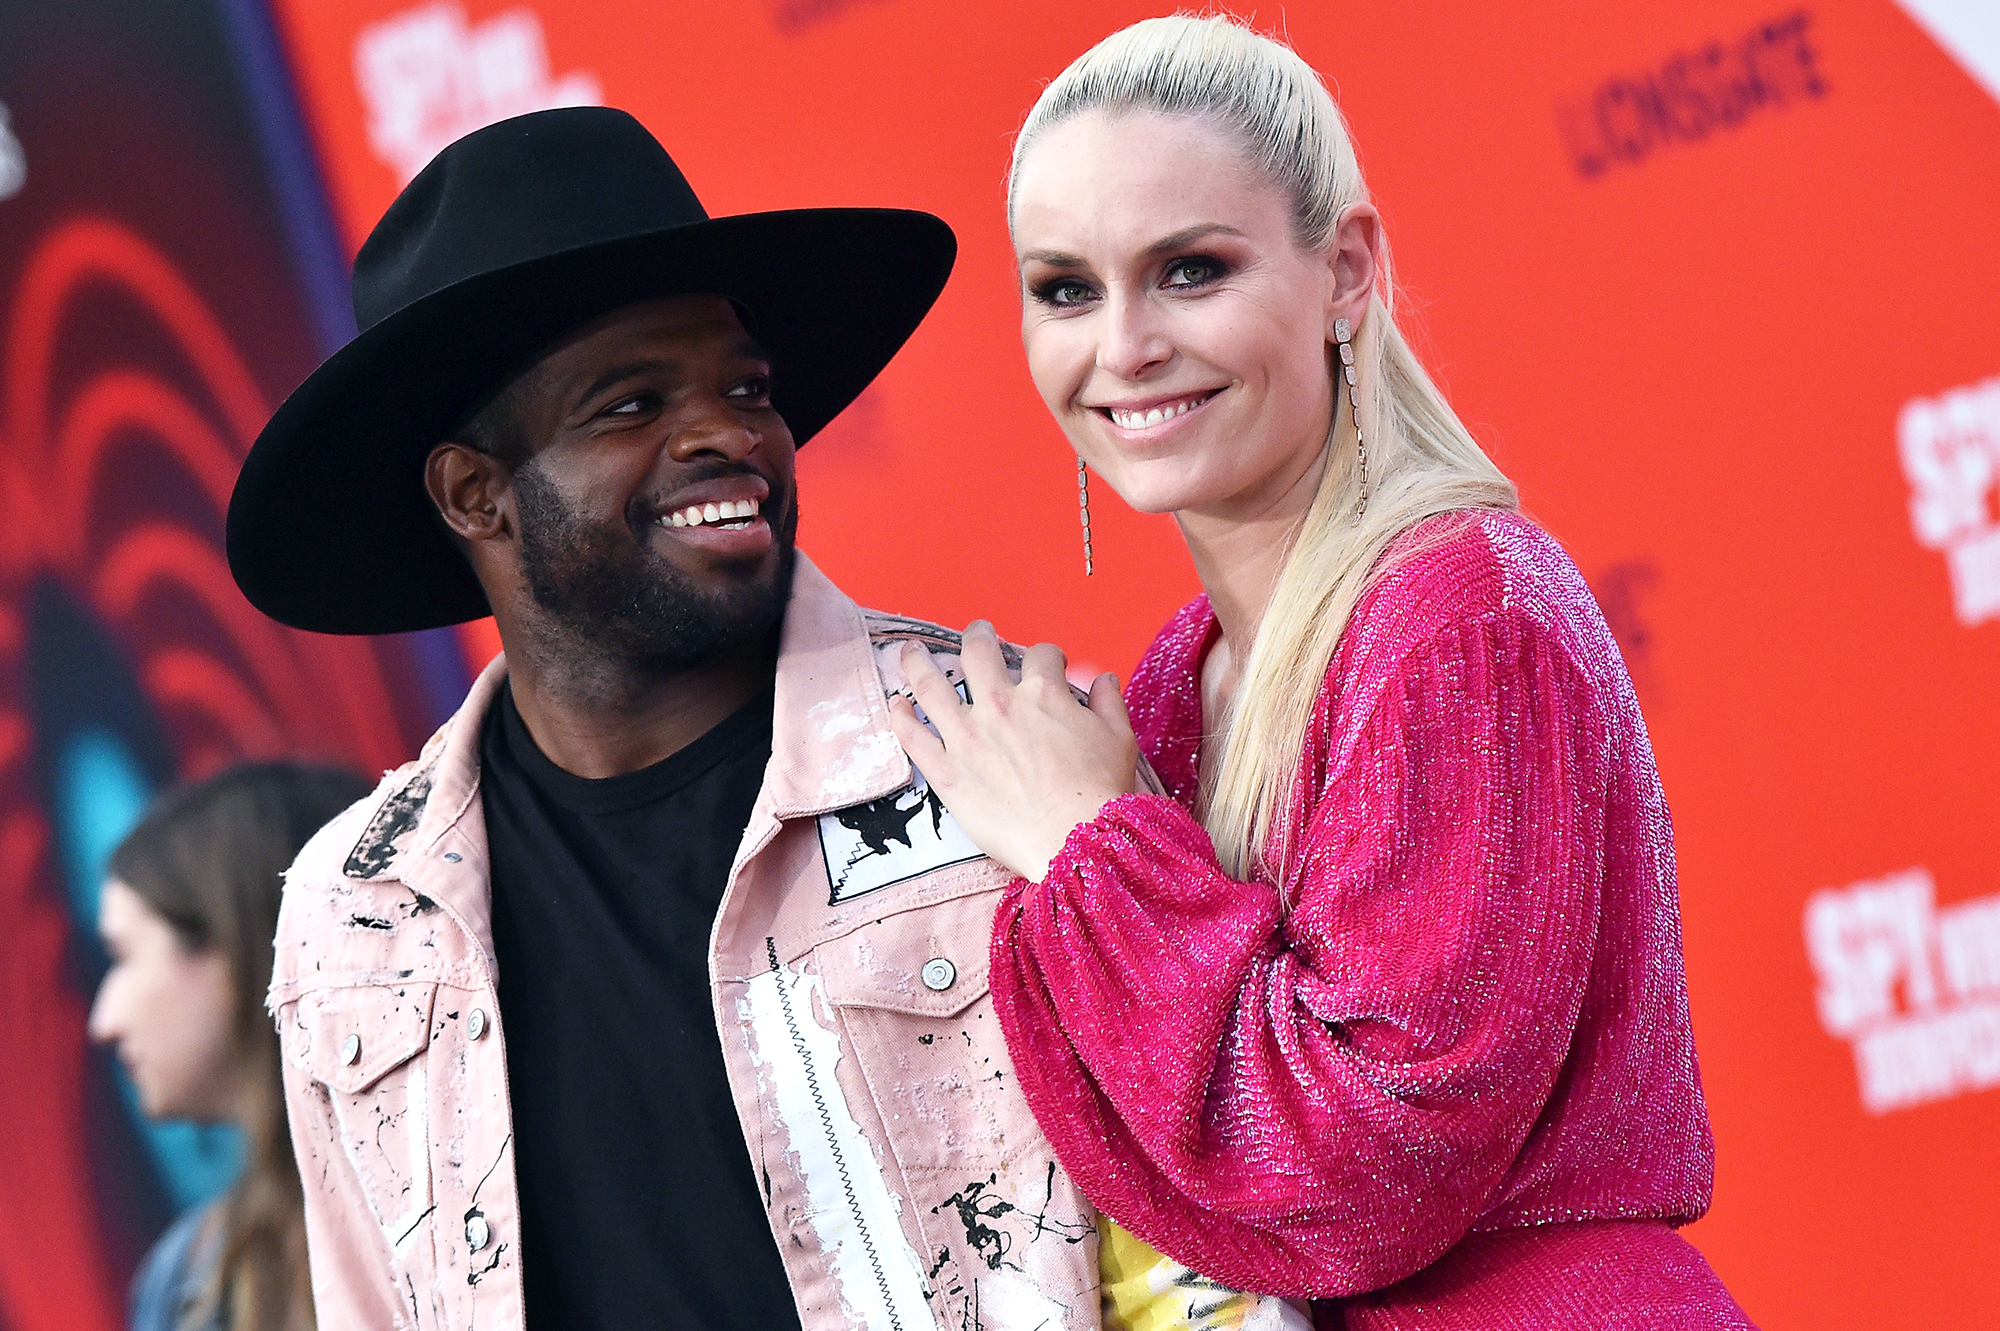 Lindsey Vonn: BF P.K. Subban and I Are 'Very Much in Love